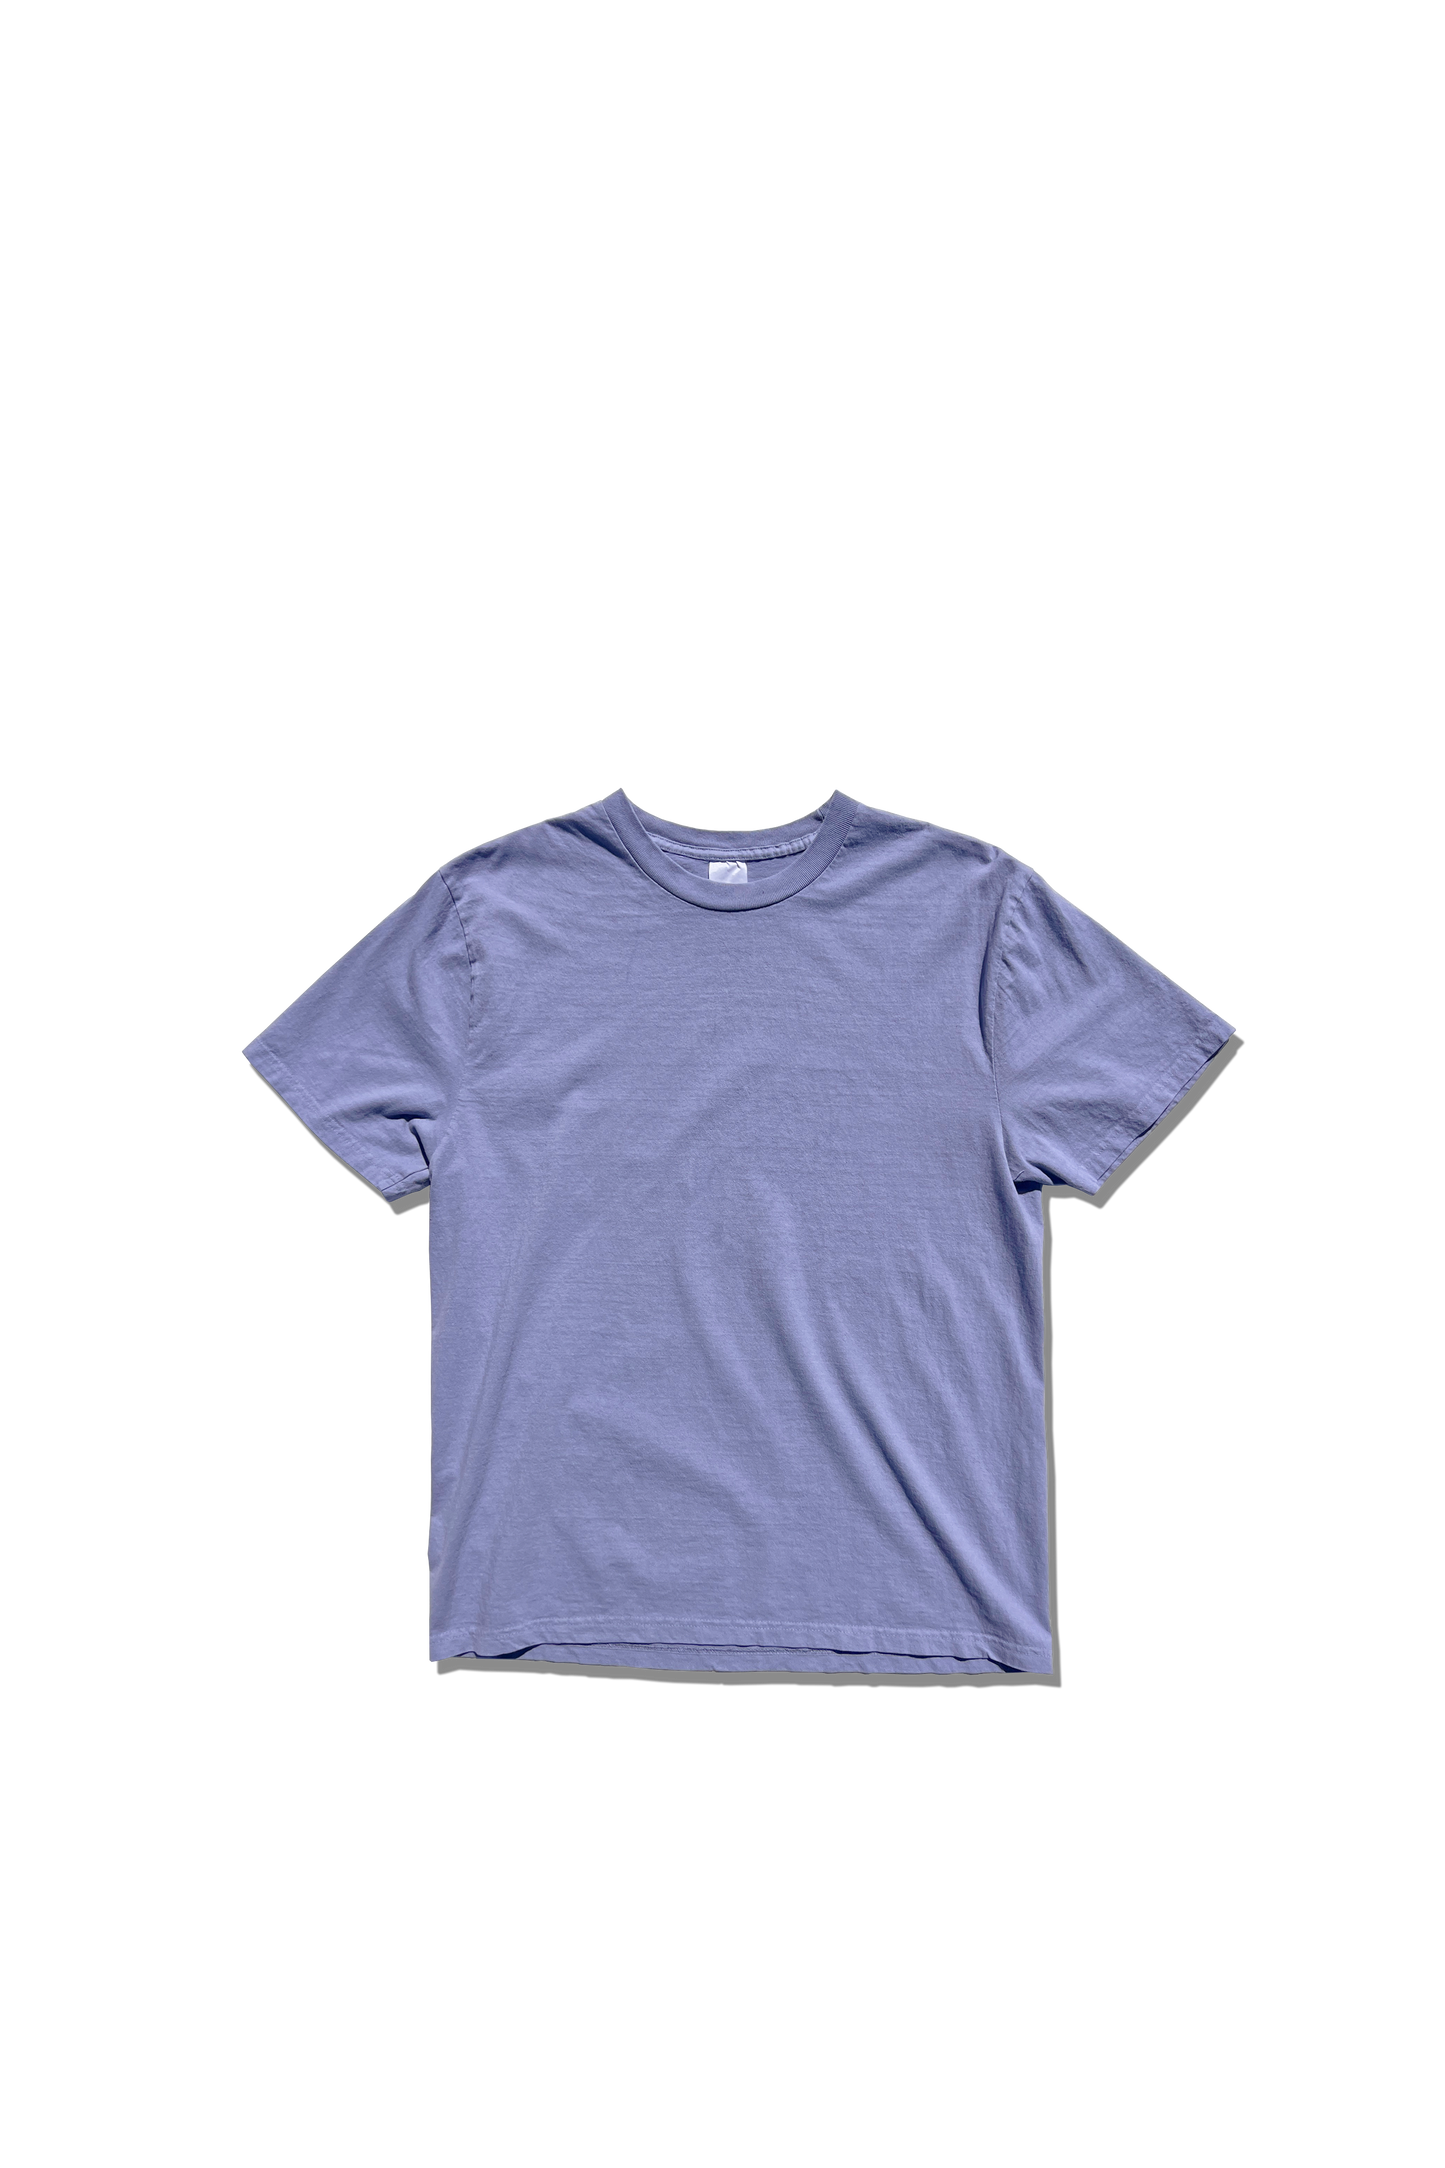 Exclusive Homeroom T-Shirt - French Lavender